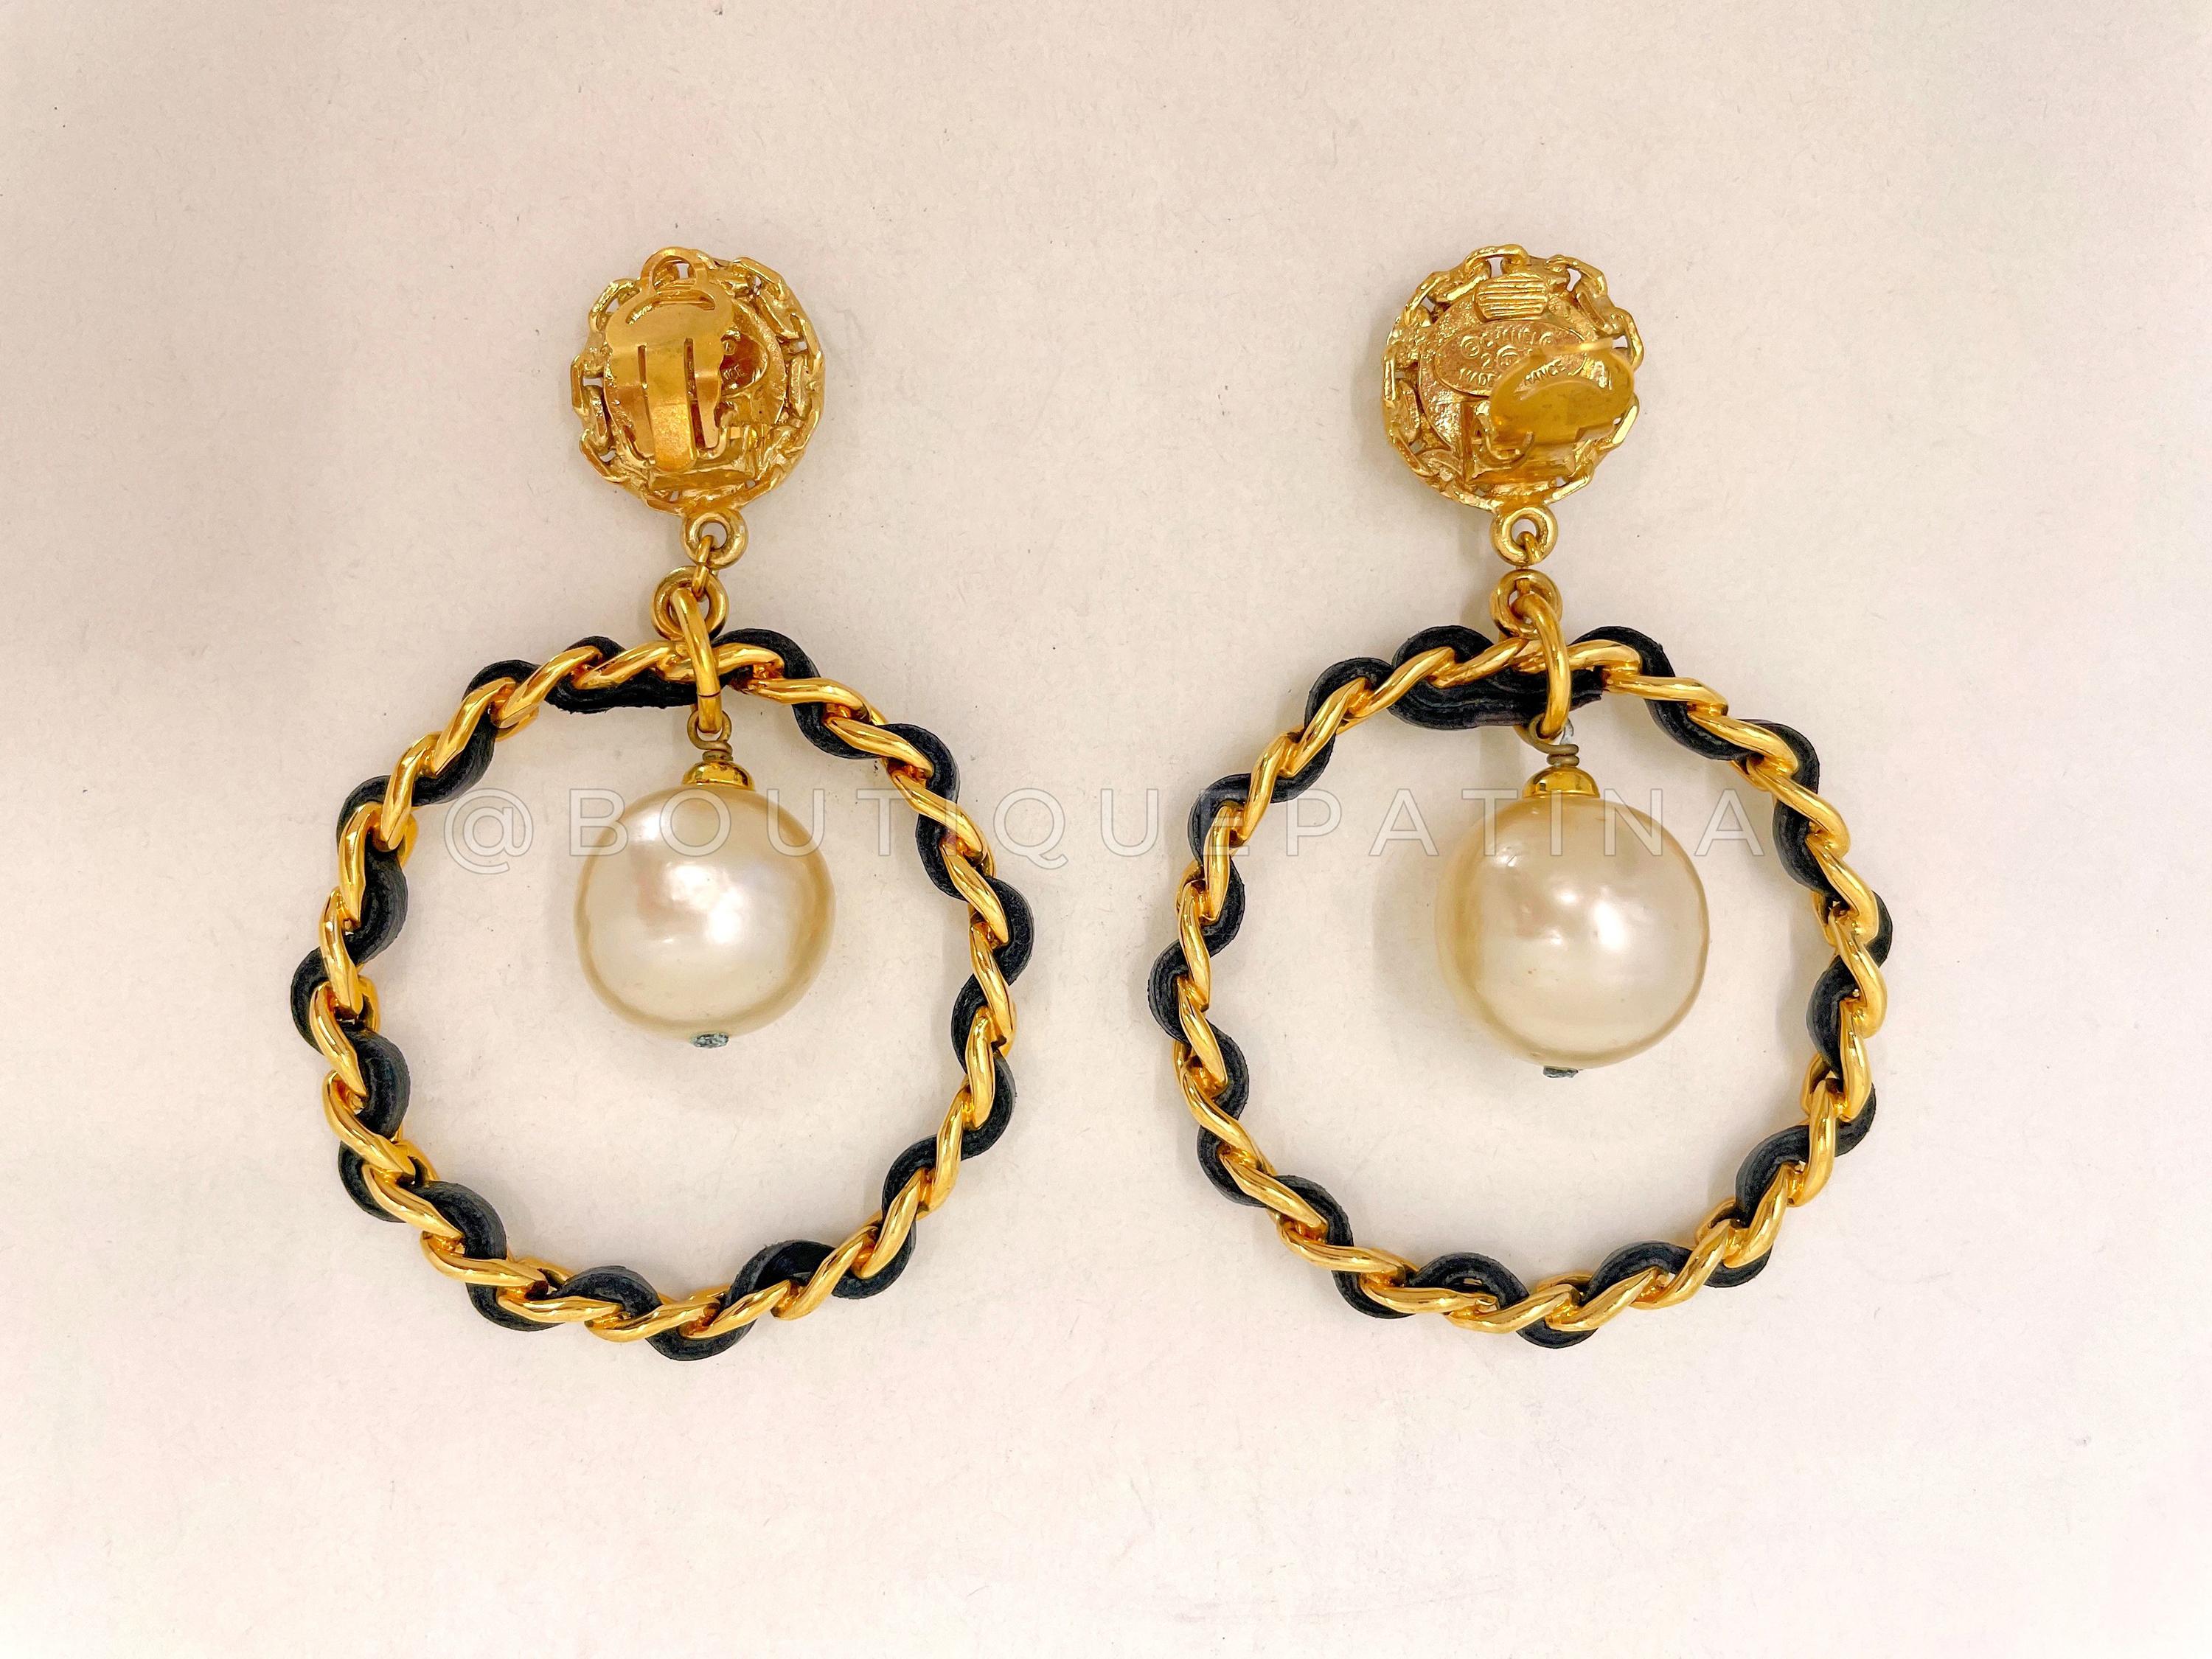 Store item: 65928
Chanel Vintage Woven Chain Collection 27 Pearl Drop Hoop Earrings

Condition: Excellent
For 19 years, Boutique Patina has specialized in sourcing and curating the best condition vintage leather treasures by searching closets around